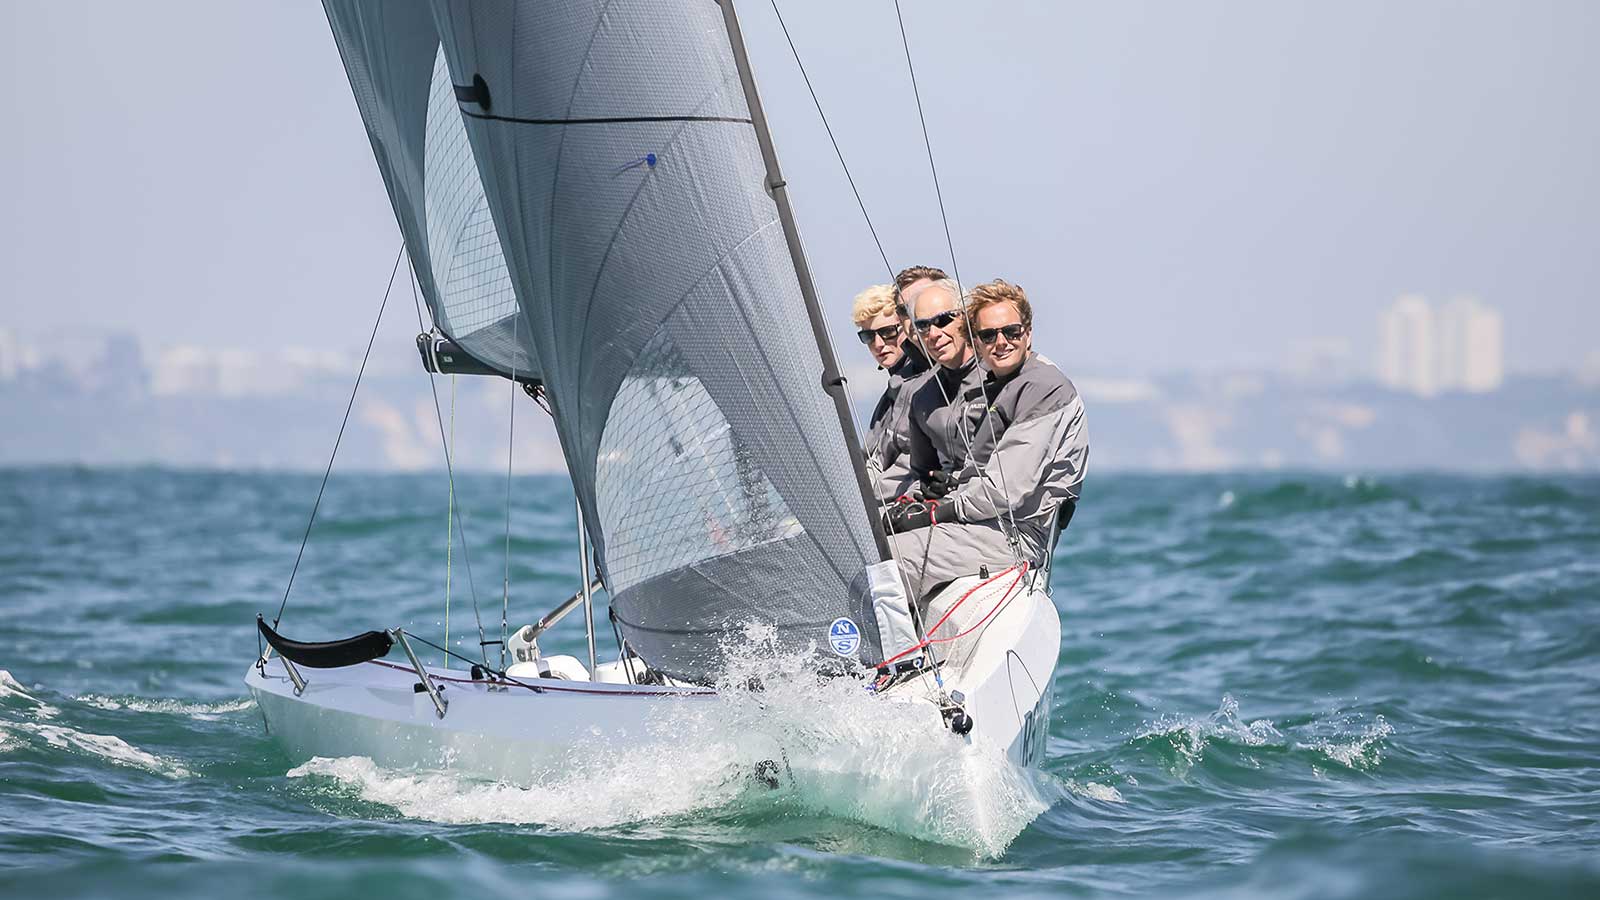 RS 21 | Boat Solutions, Utting am Ammersee